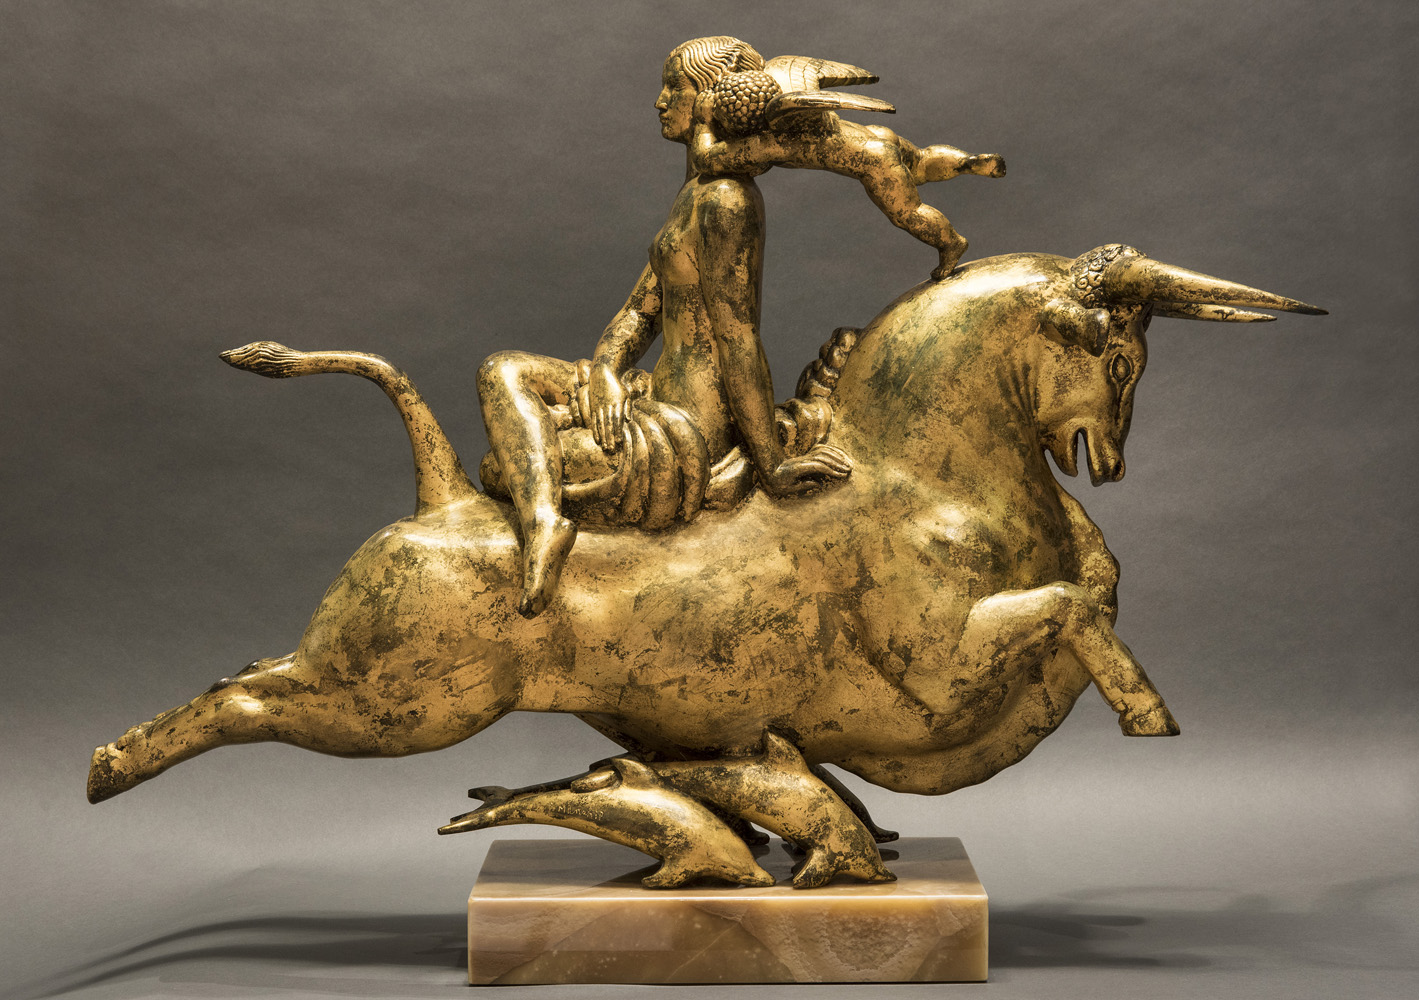 

											American Figurative  </b>

											<em>
												Now on view in New York</em> 

											<h4>
																							</h4>

		                																																													<i>Paul Howard Manship,</i>  
																																								Flight or Europa, 1925, 
																																								Bronze, 
																																								20 3/8 x 31 1/4 inches 
																								
		                				